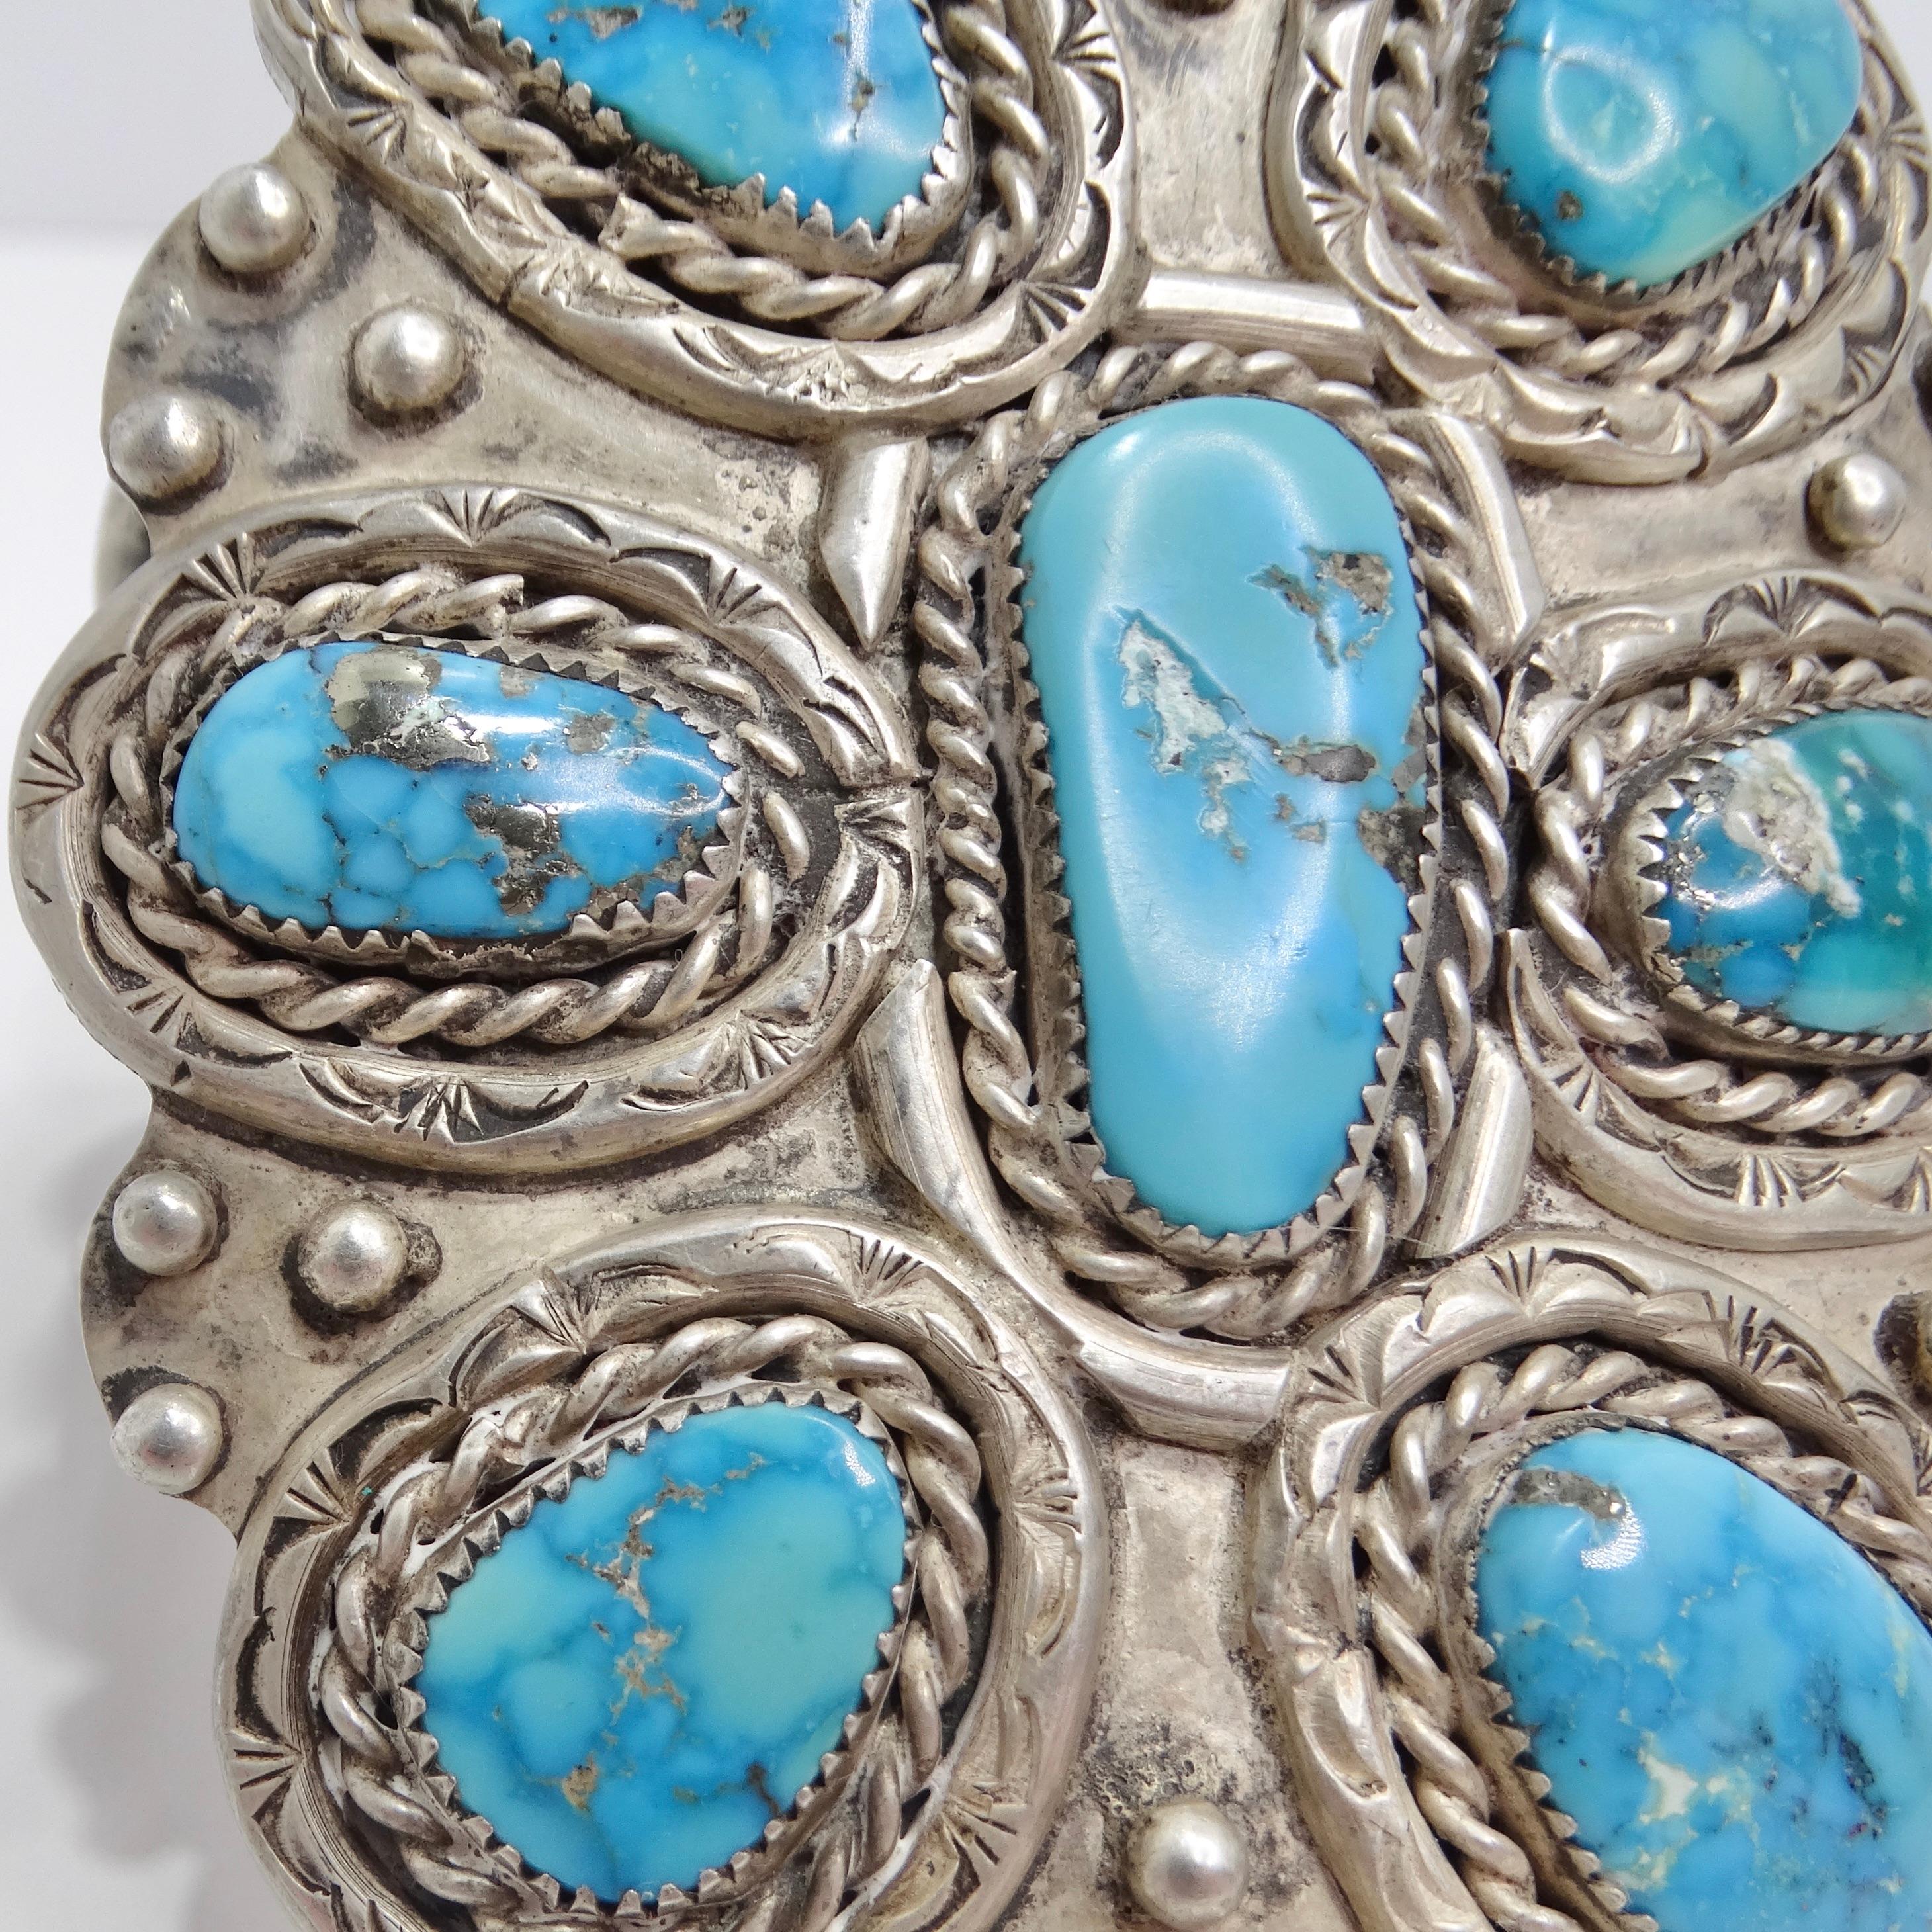 Introducing the exquisite 1970s Silver Turquoise Cuff Bracelet, a vintage treasure that exudes timeless elegance and eye-catching beauty. Crafted from sterling silver, this cuff bracelet features a whimsical arrangement of bright blue turquoise